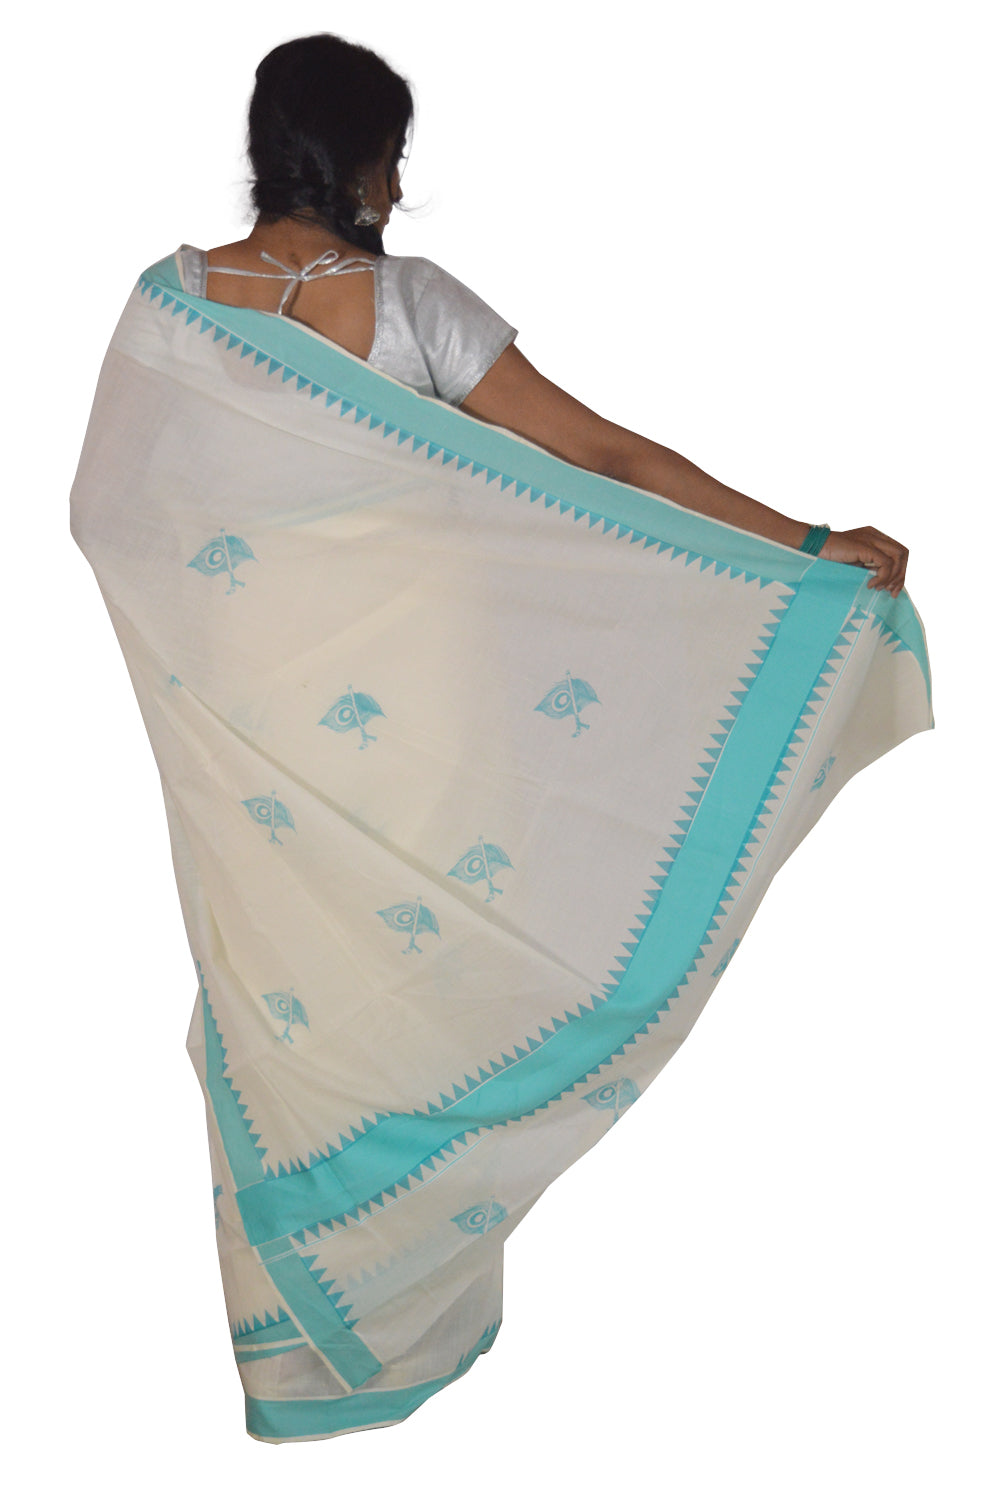 Kerala Saree with Turquoise Peacock Feather and Temple Border Block Print